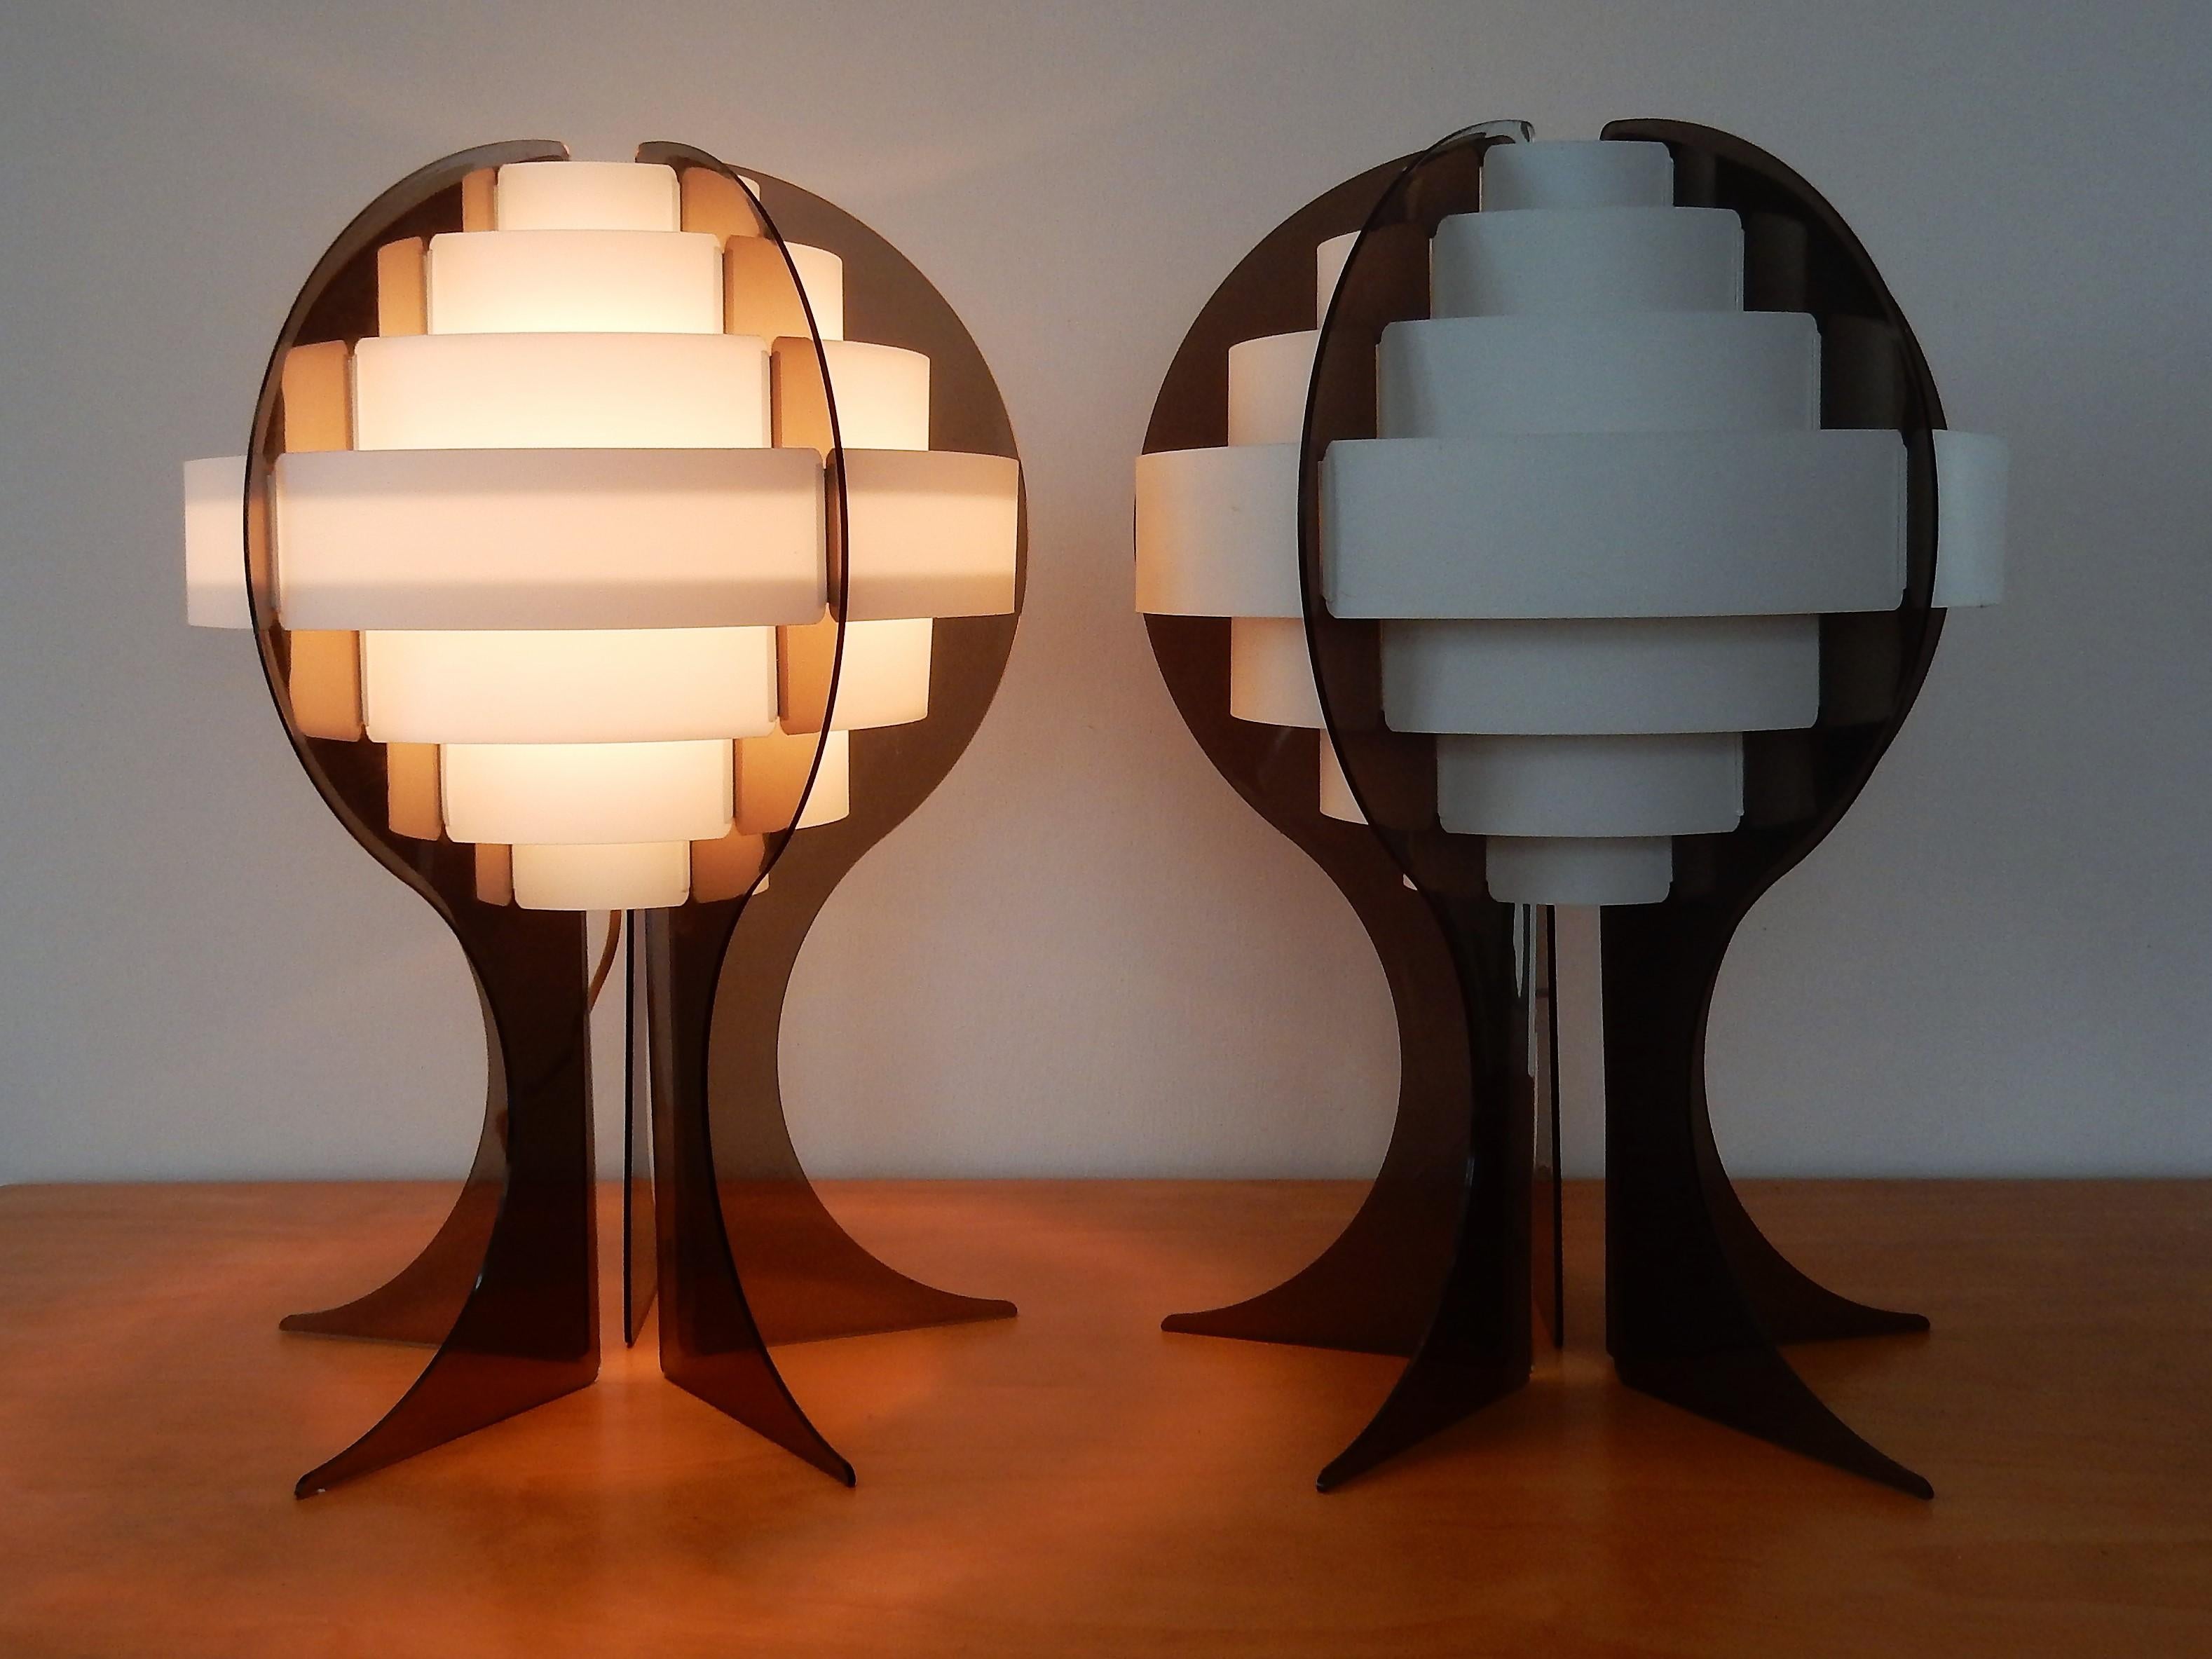 This 'Strips' table lamp was designed in the late 1960s-early 1970s by Preben Jacobsen & Flemming Brylle for Quality System in Denmark. It has a smokey grey acrylic base which supports a shade, made of white pvc rings (strips). Each ring overlaps